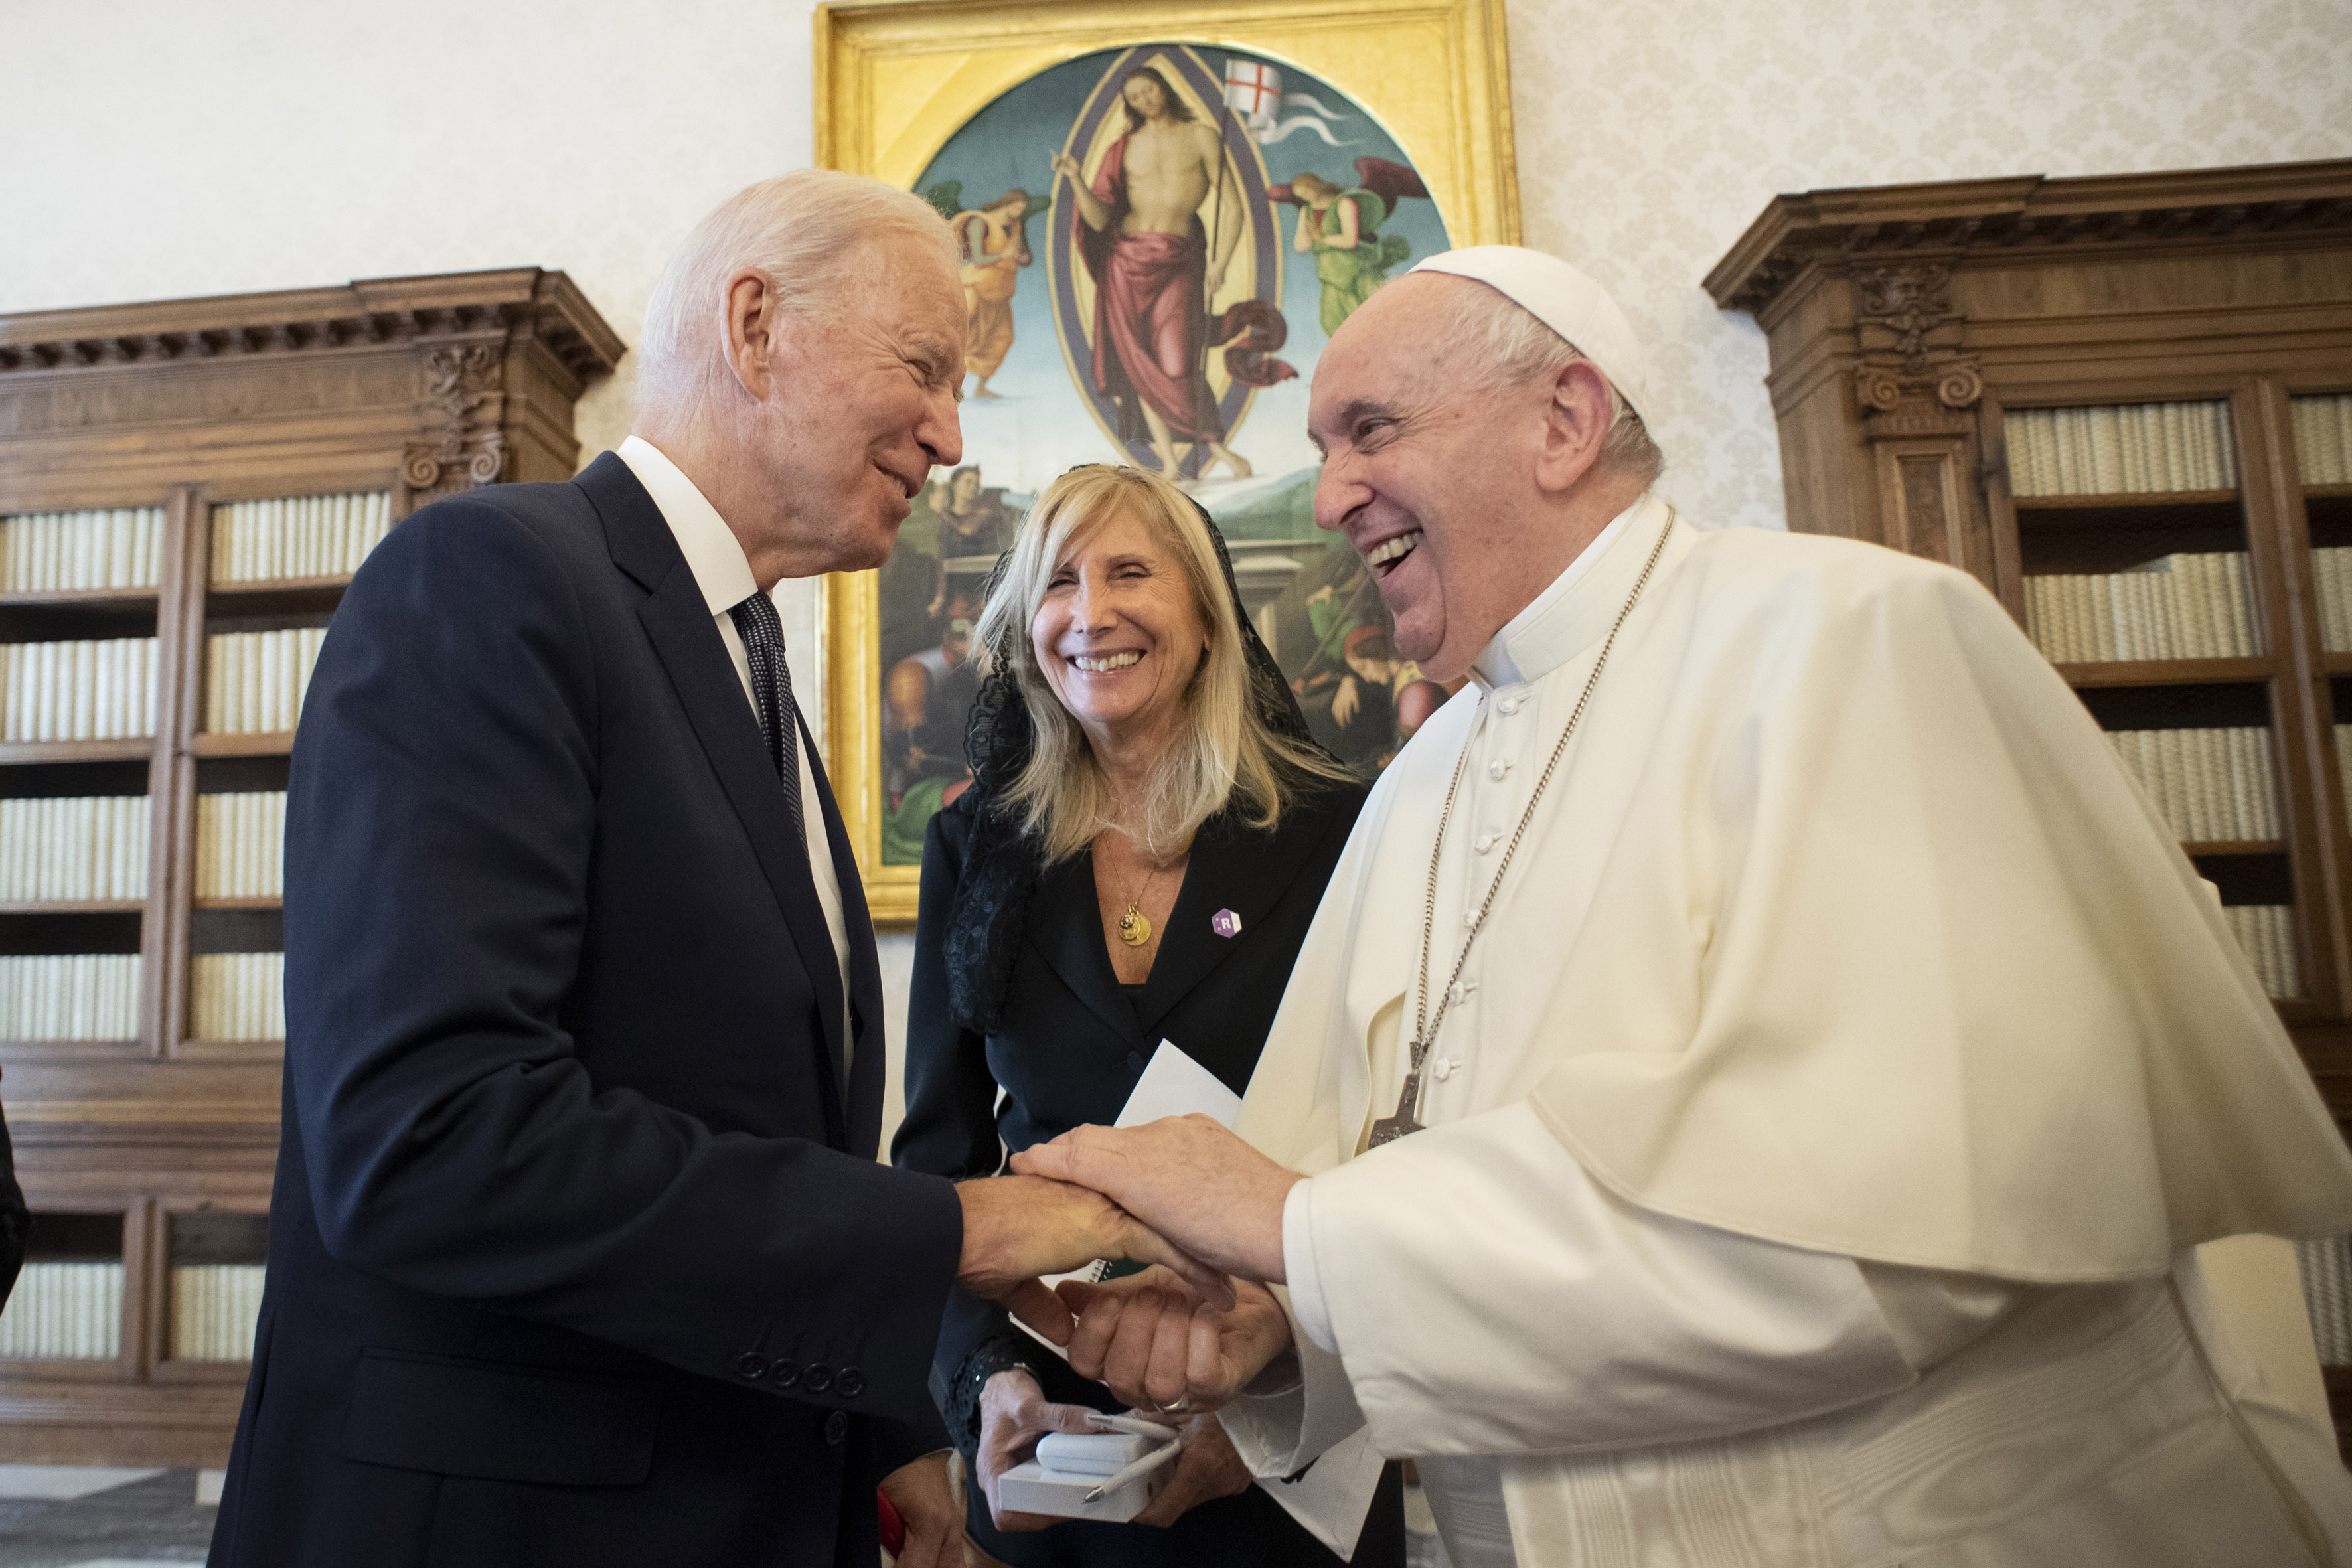 US President Joe Biden, left, shakes hands with Pope Francis as they meet at the Vatican, Friday, Oct. 29, 2021. President Joe Biden is set to meet with Pope Francis on Friday at the Vatican, where the world’s two most notable Roman Catholics plan to discuss the COVID-19 pandemic, climate change and poverty. The president takes pride in his Catholic faith, using it as moral guidepost to shape many of his social and economic policies. 